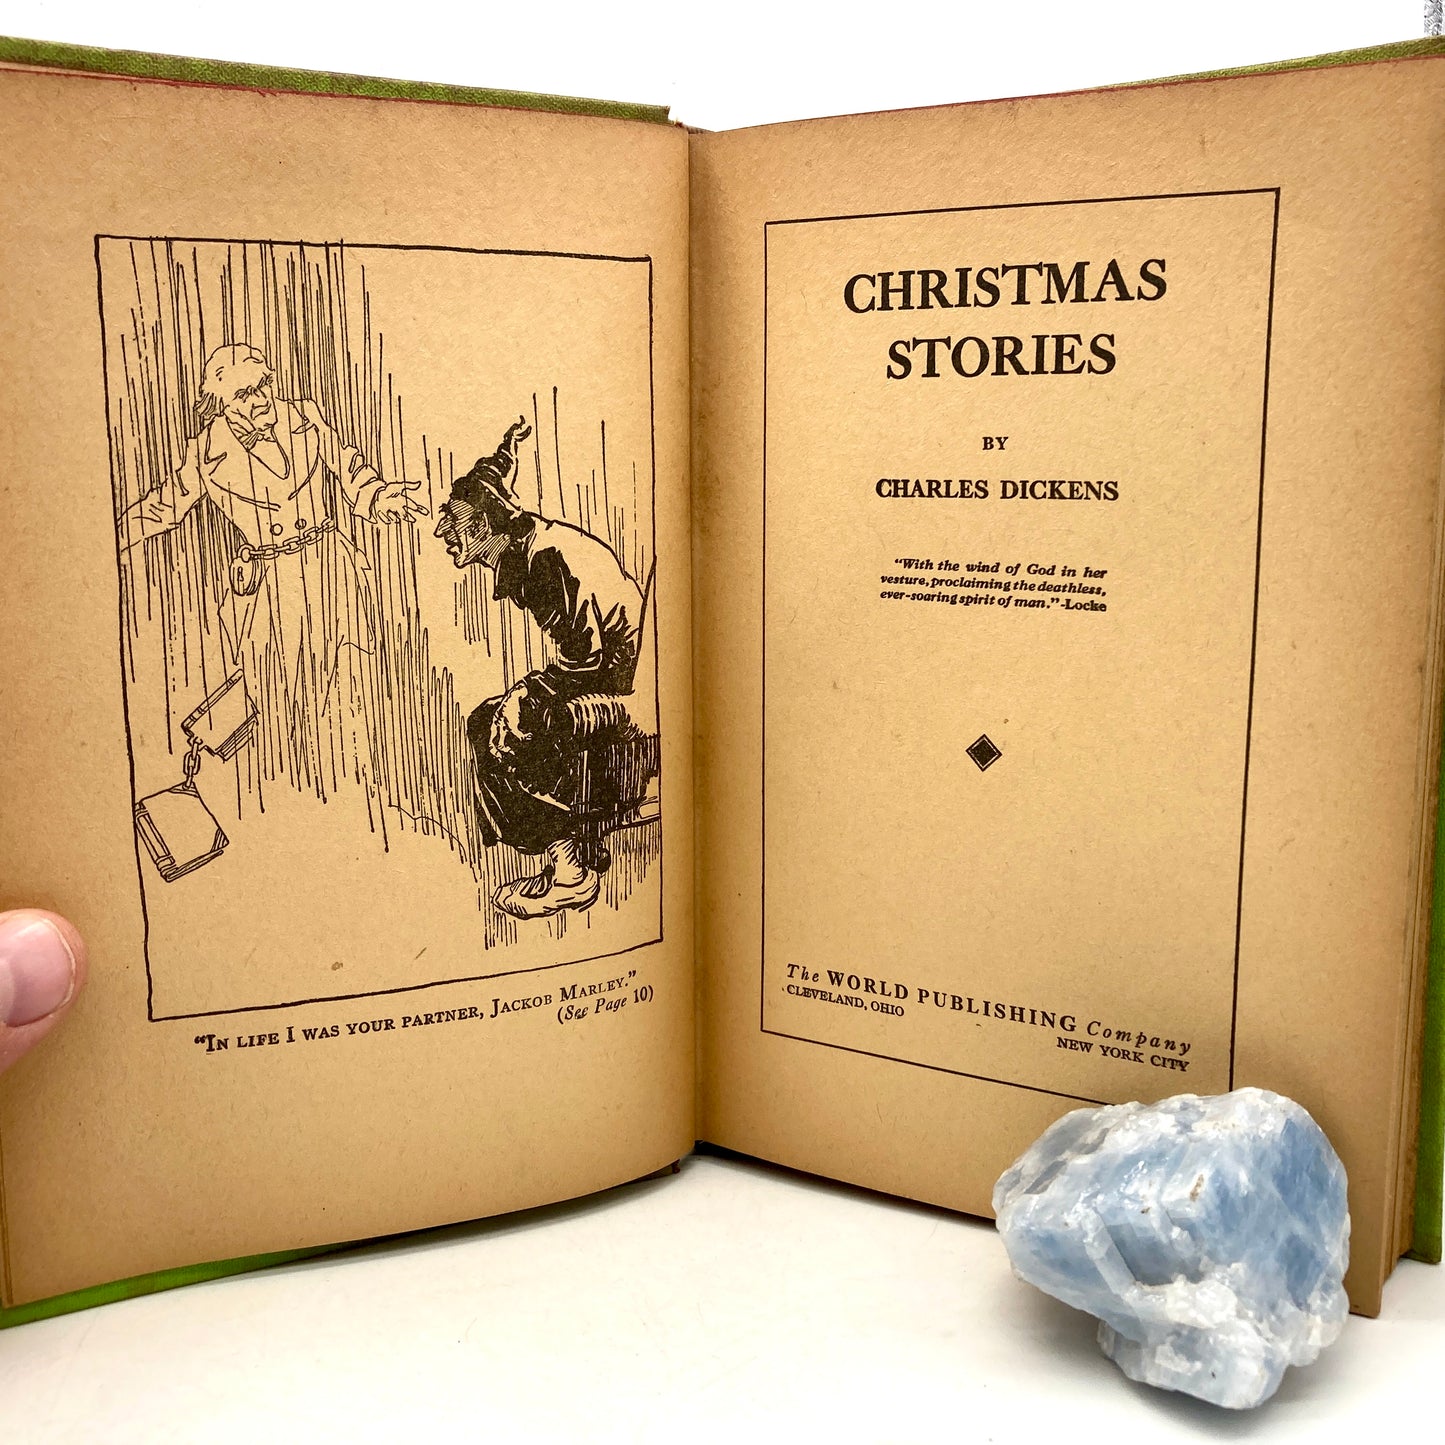 DICKENS, Charles "Christmas Stories" [World Publishing Company, 1946]